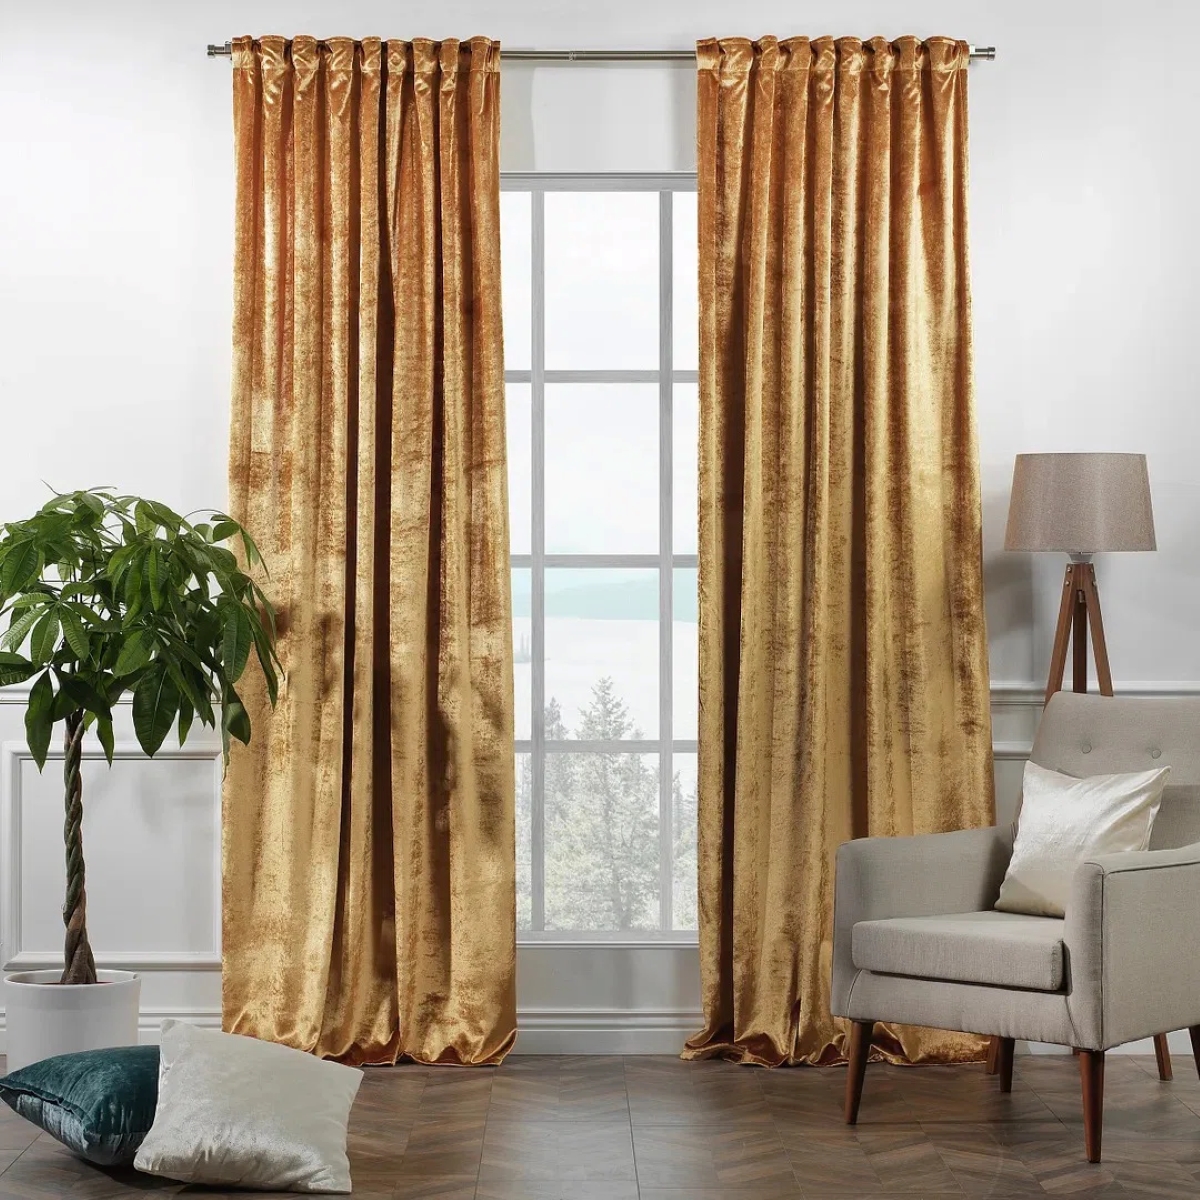 Long gold curtain hung above window.